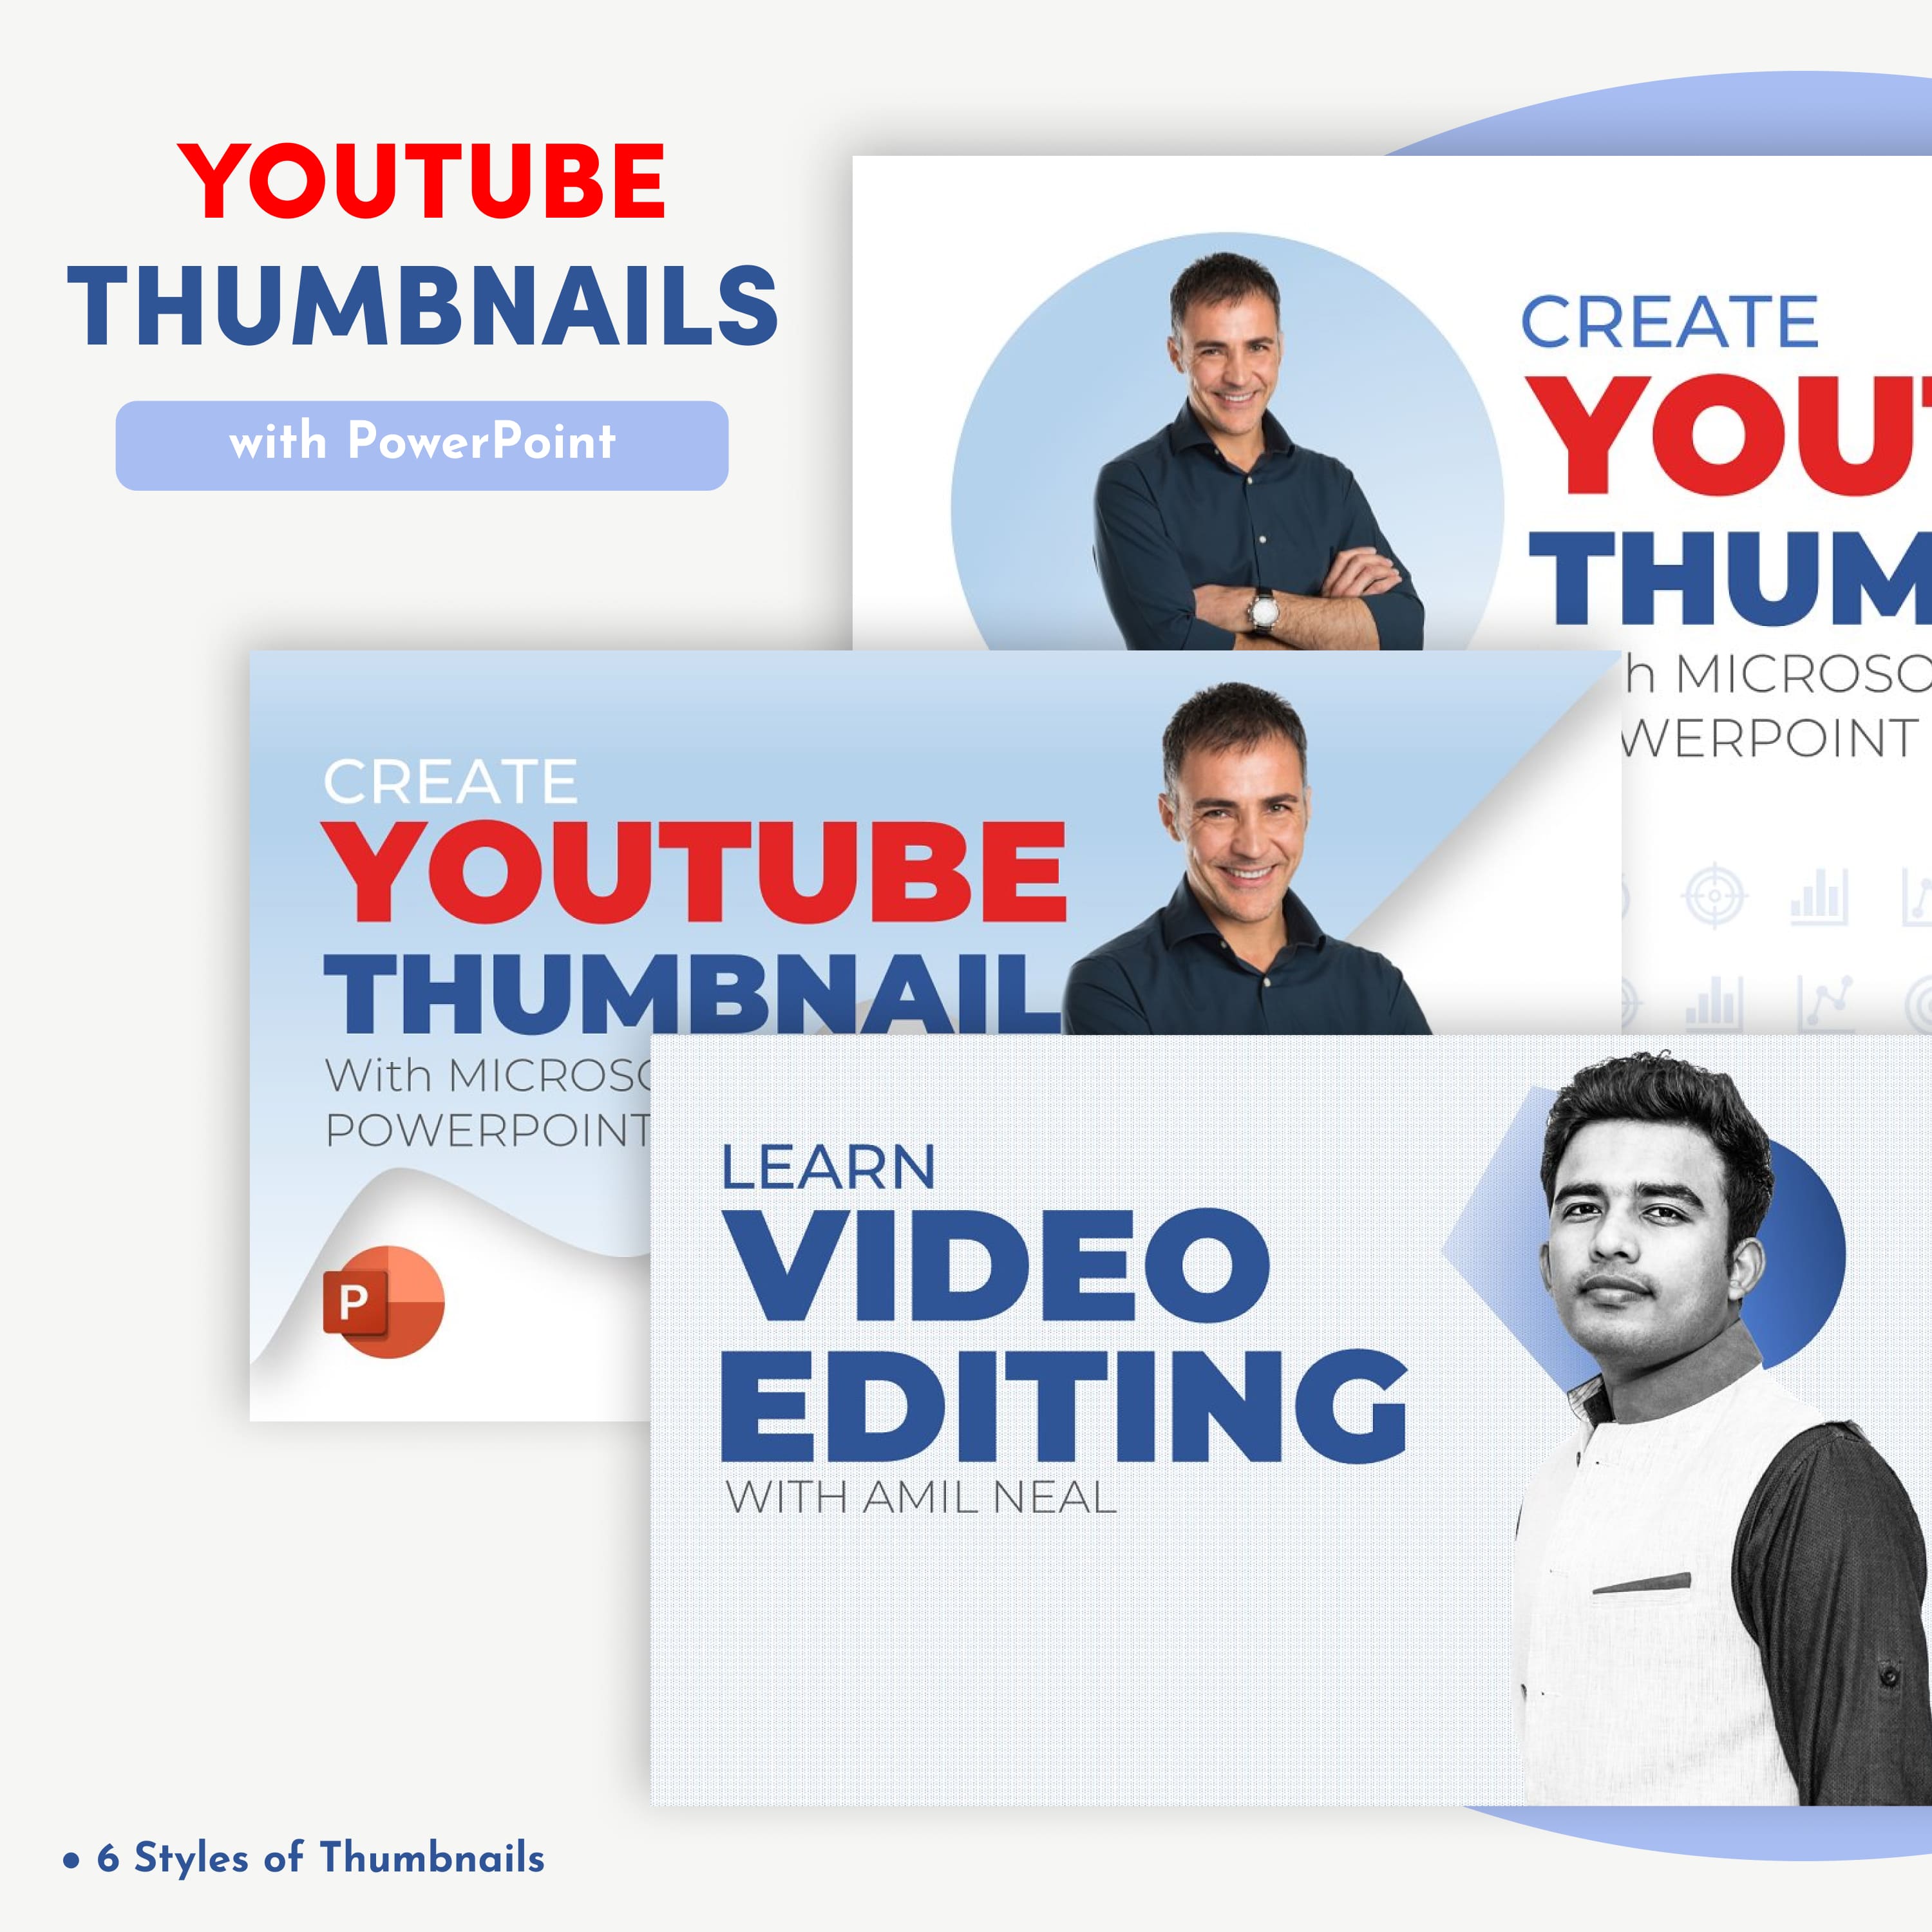 Youtube Thumbnails with PowerPoint.